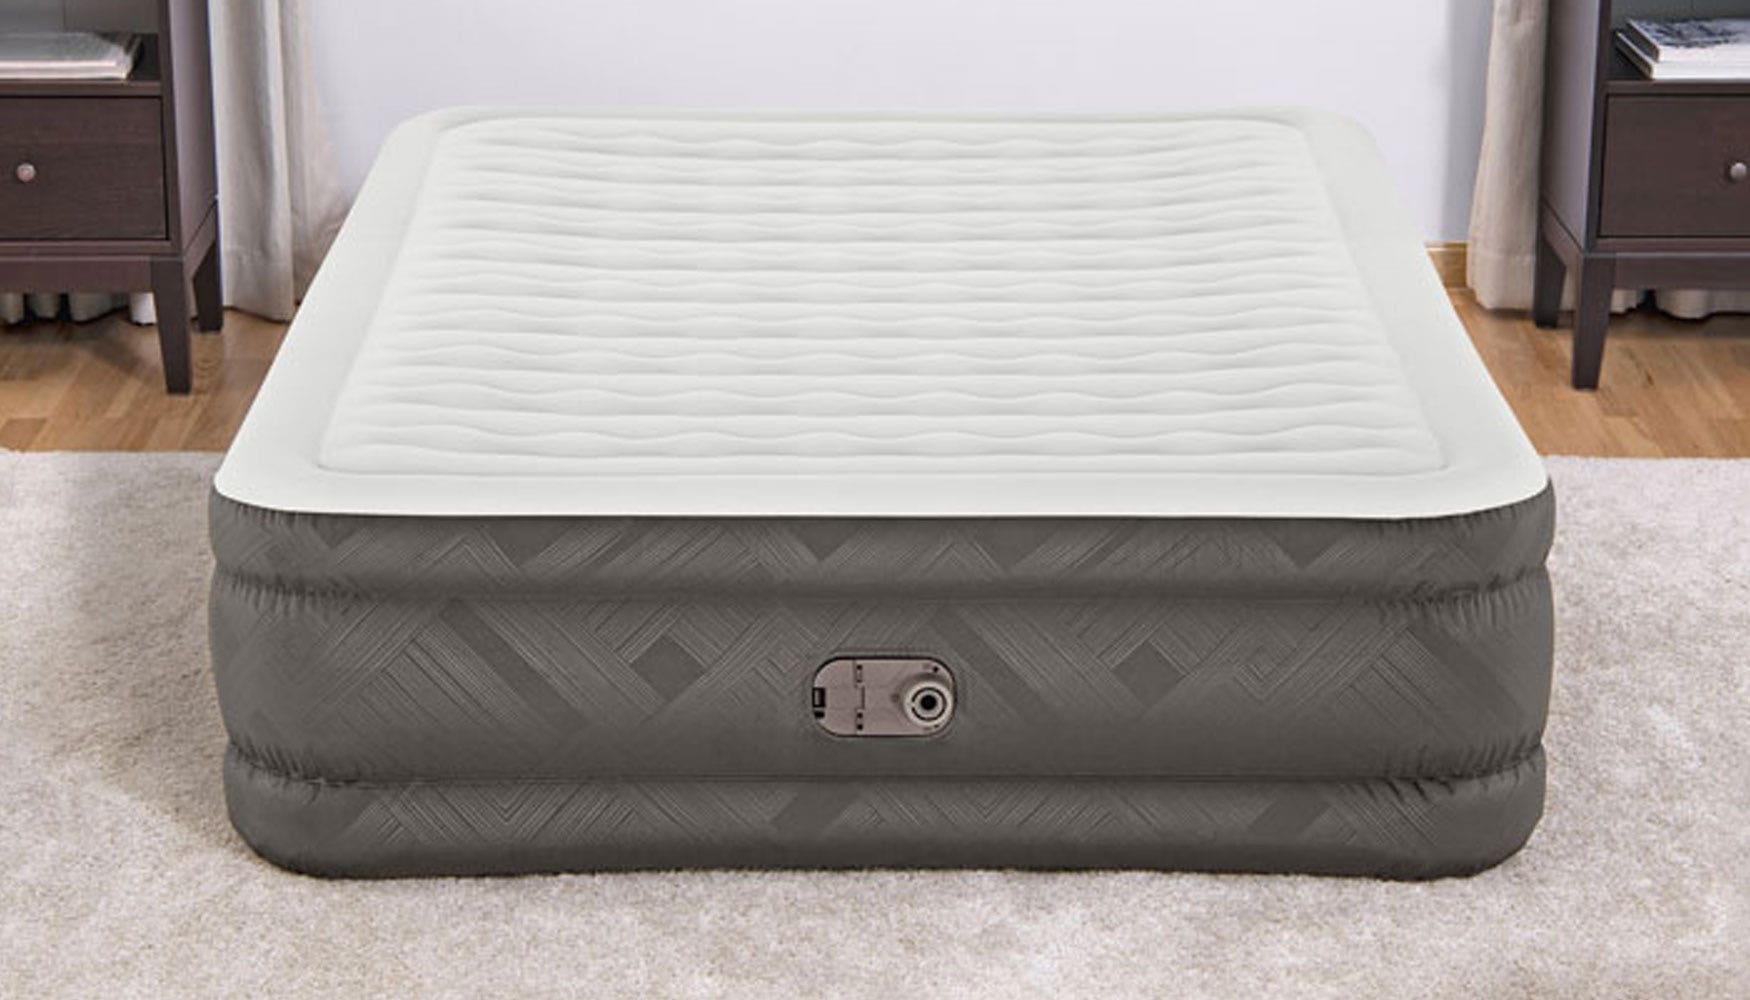 How to Pick the Right Air Mattress for You